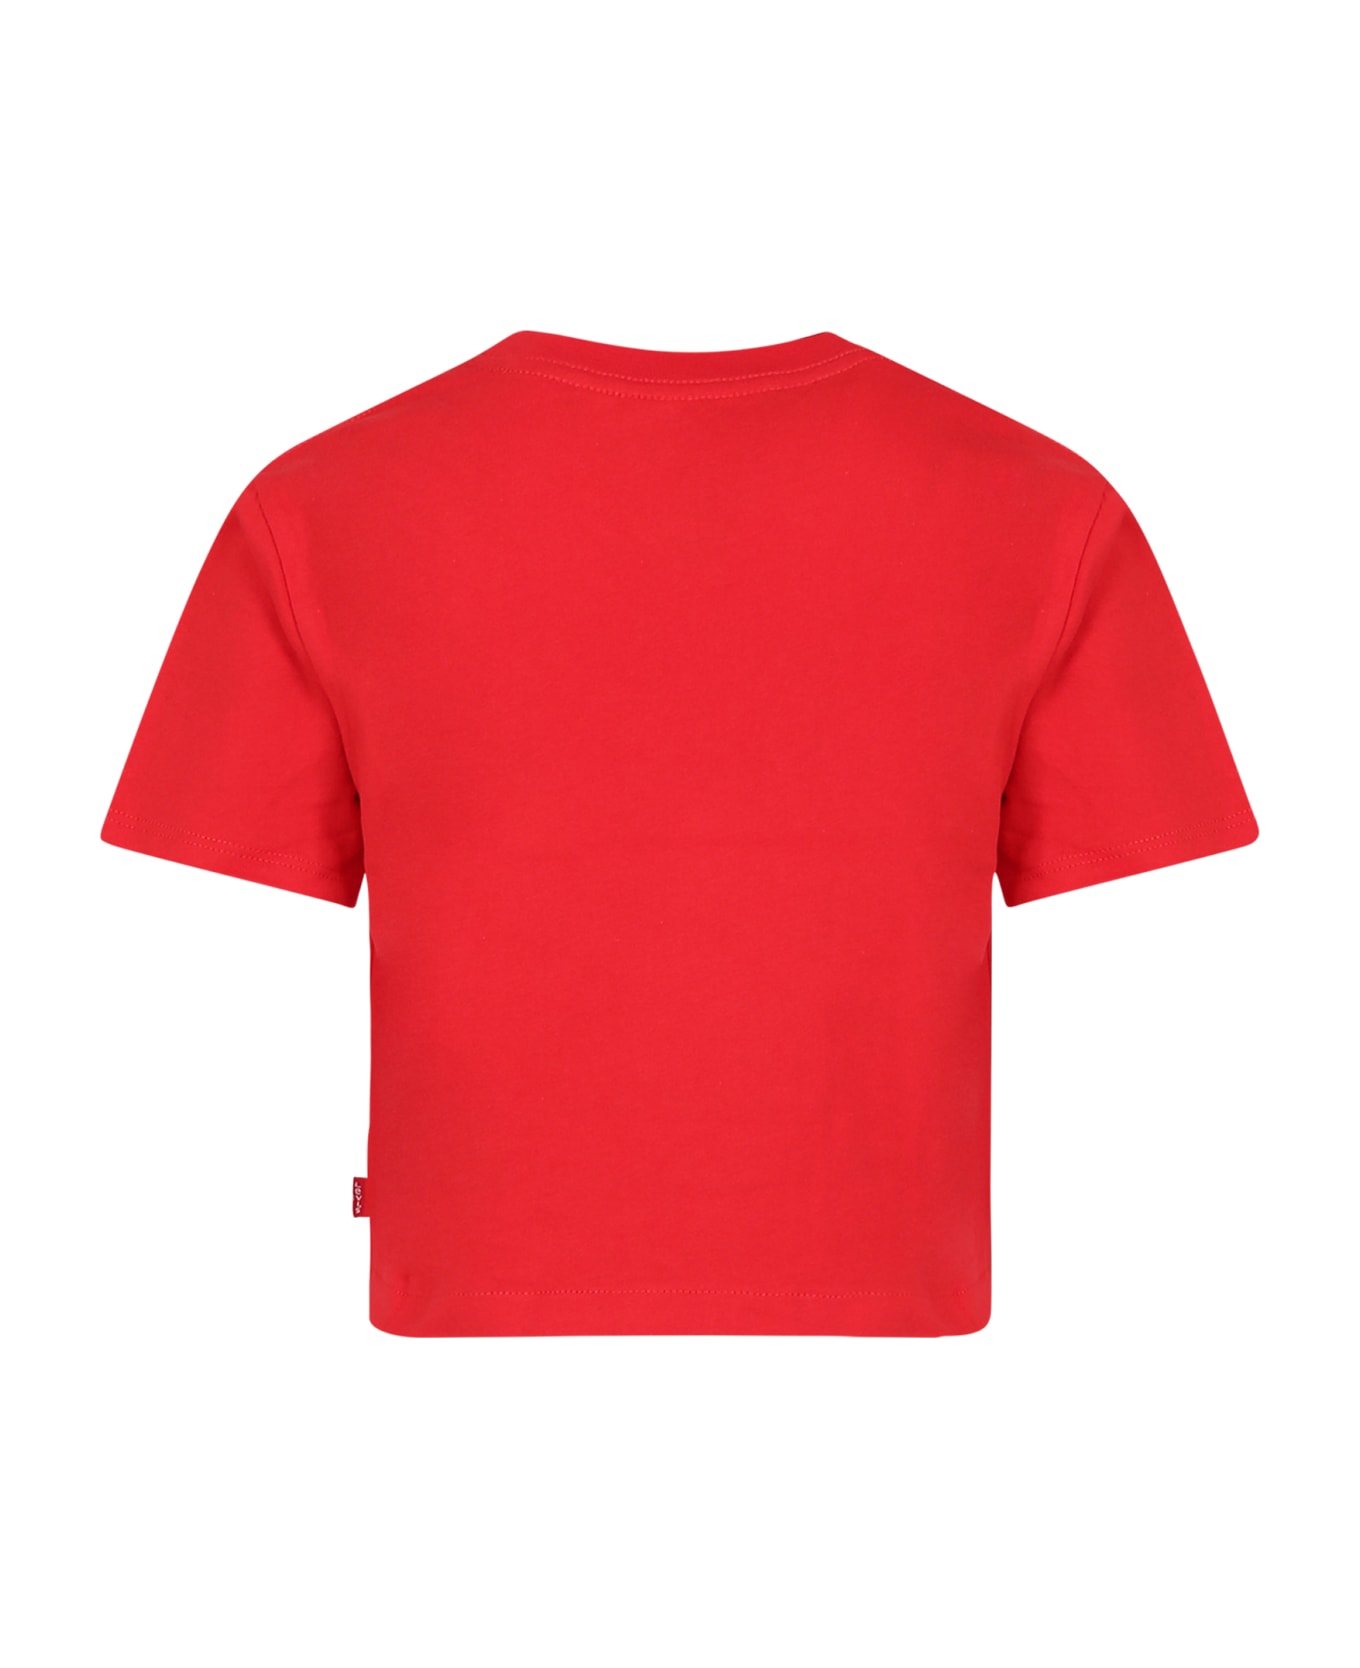 Levi's Red T-shirt For Girl With Logo - Red